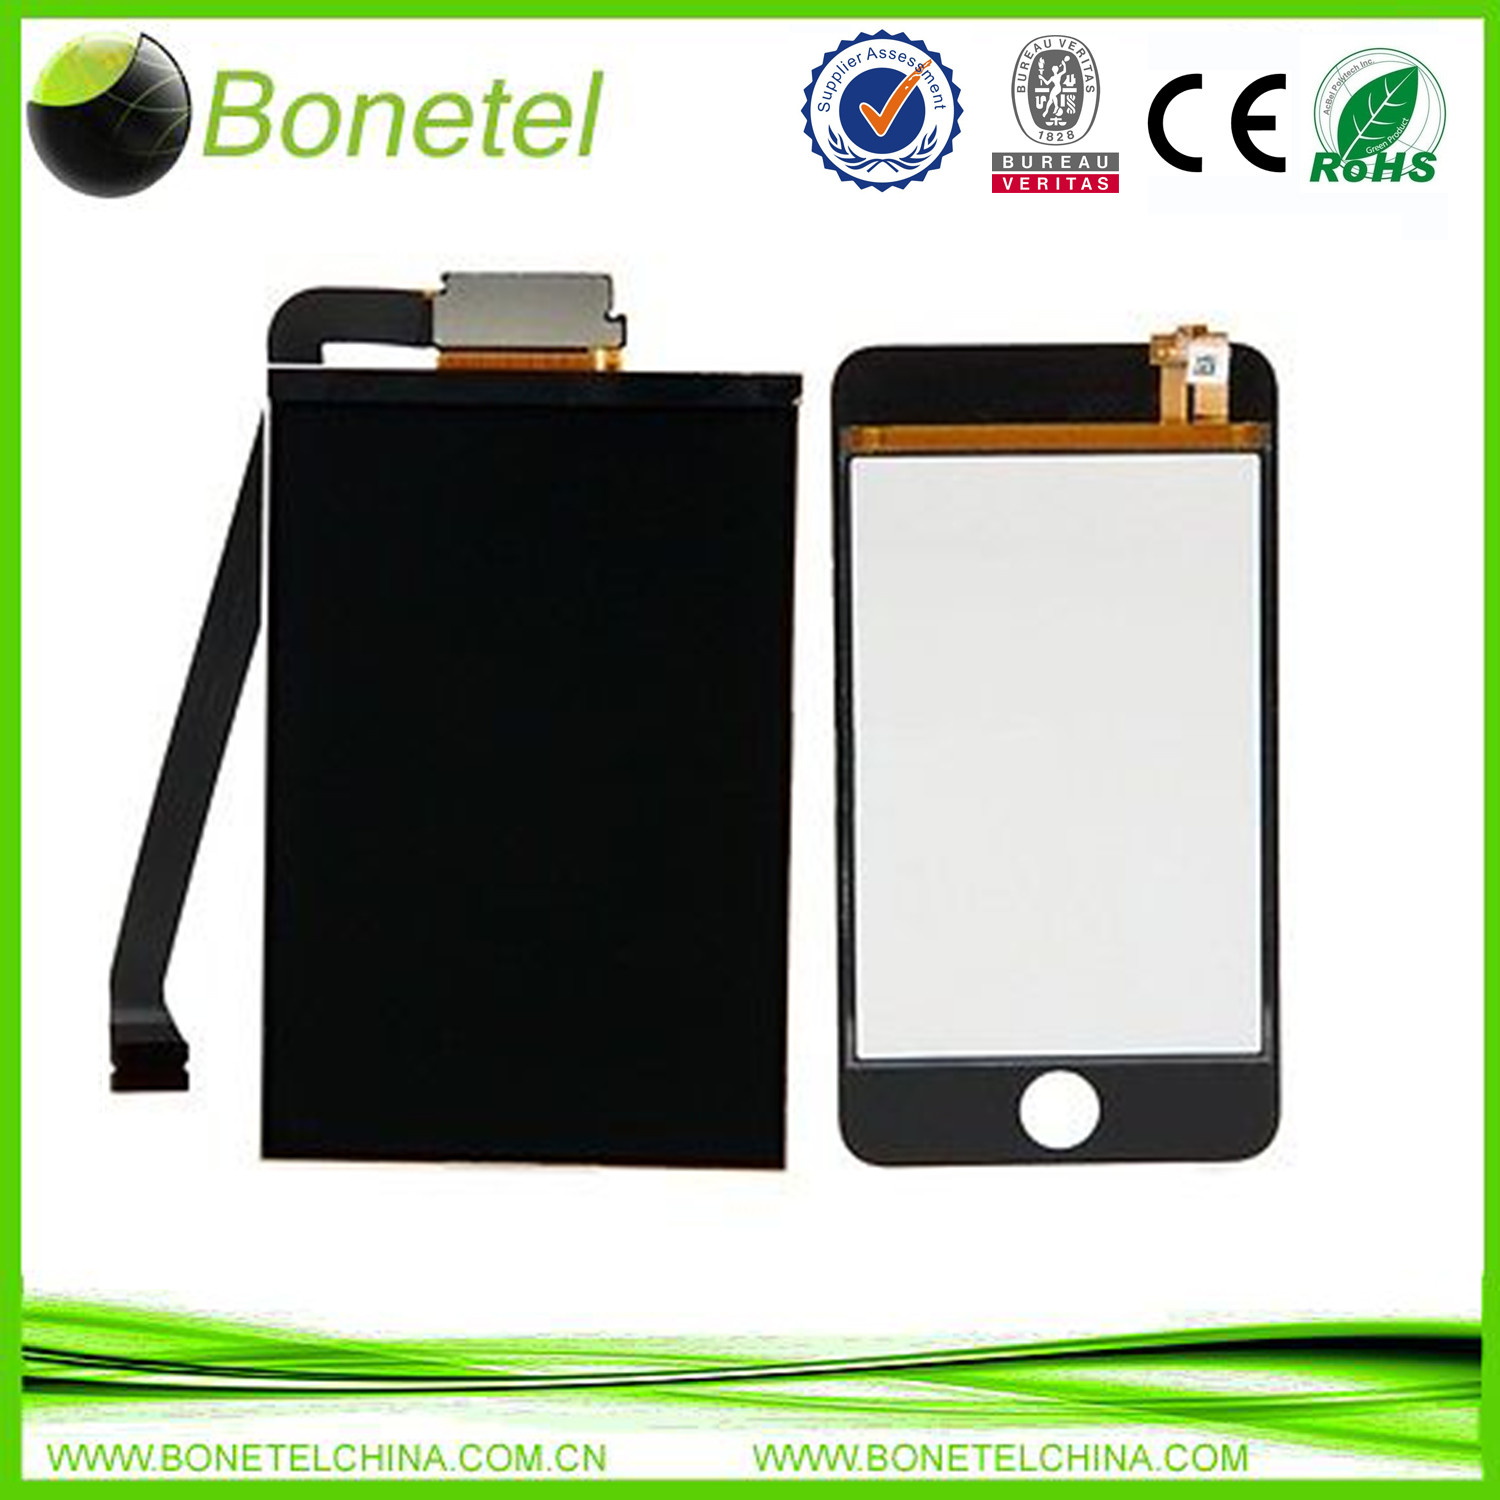 Replacement Display LCD Screen Digitizer Assembly for iPod Touch 1st Gen